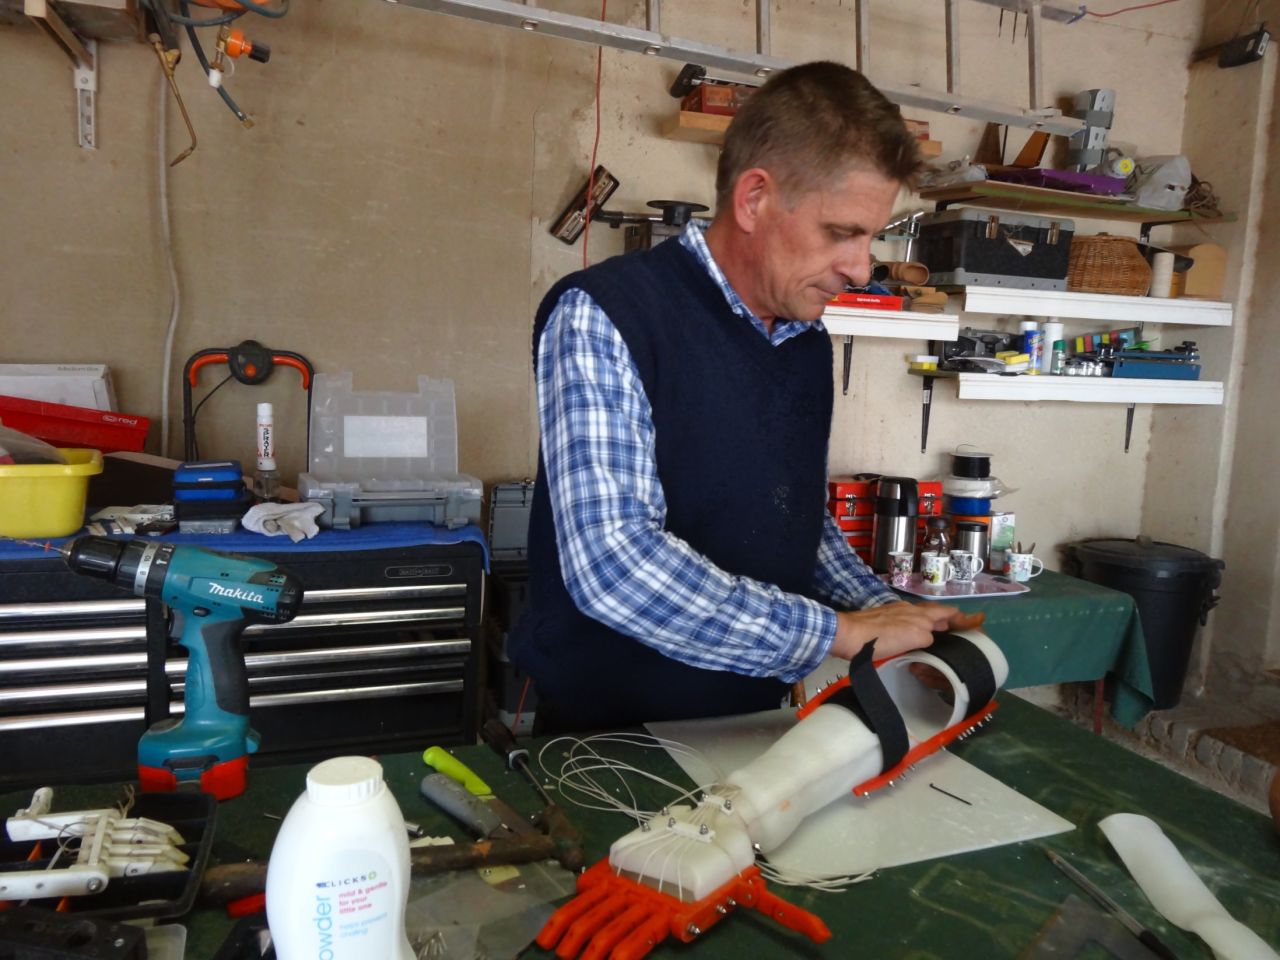 The company was started by Richard van As, who lost four fingers in a carpentry accident. His quest to replace his fingers led him to develop 3-D printed prosthetics.